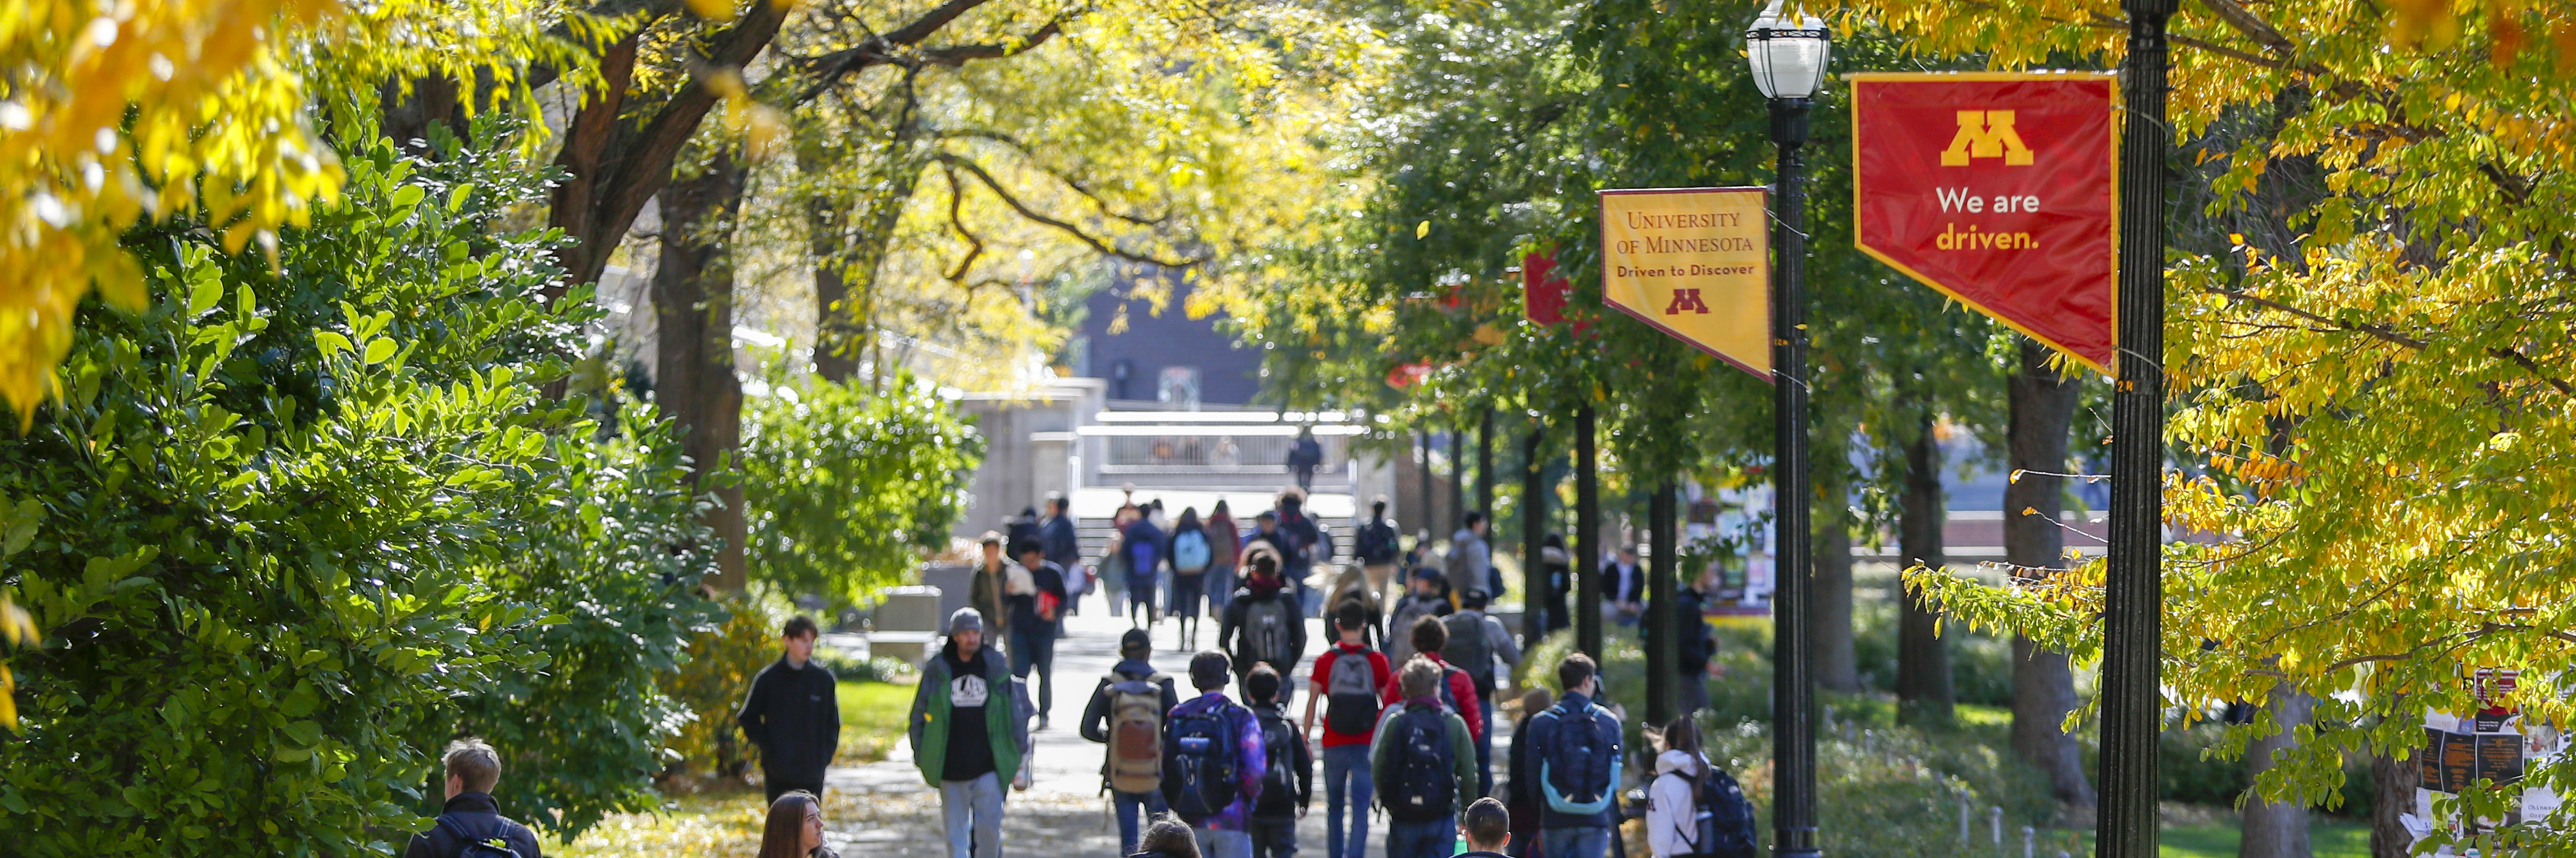 Image of students walking across campus.